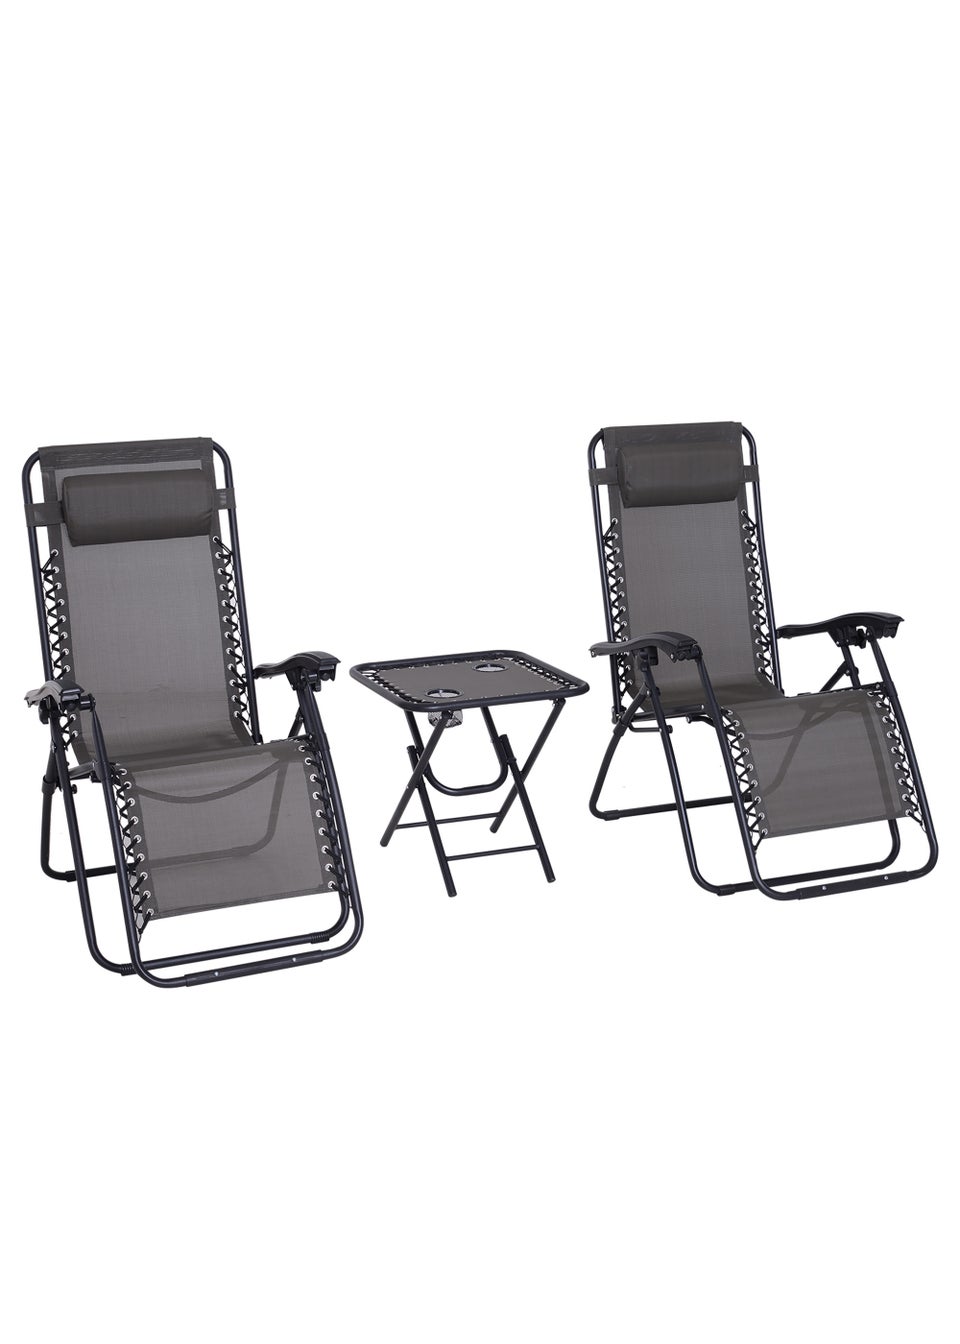 Outsunny 3 Piece Sun Lounger Table & Chairs Set